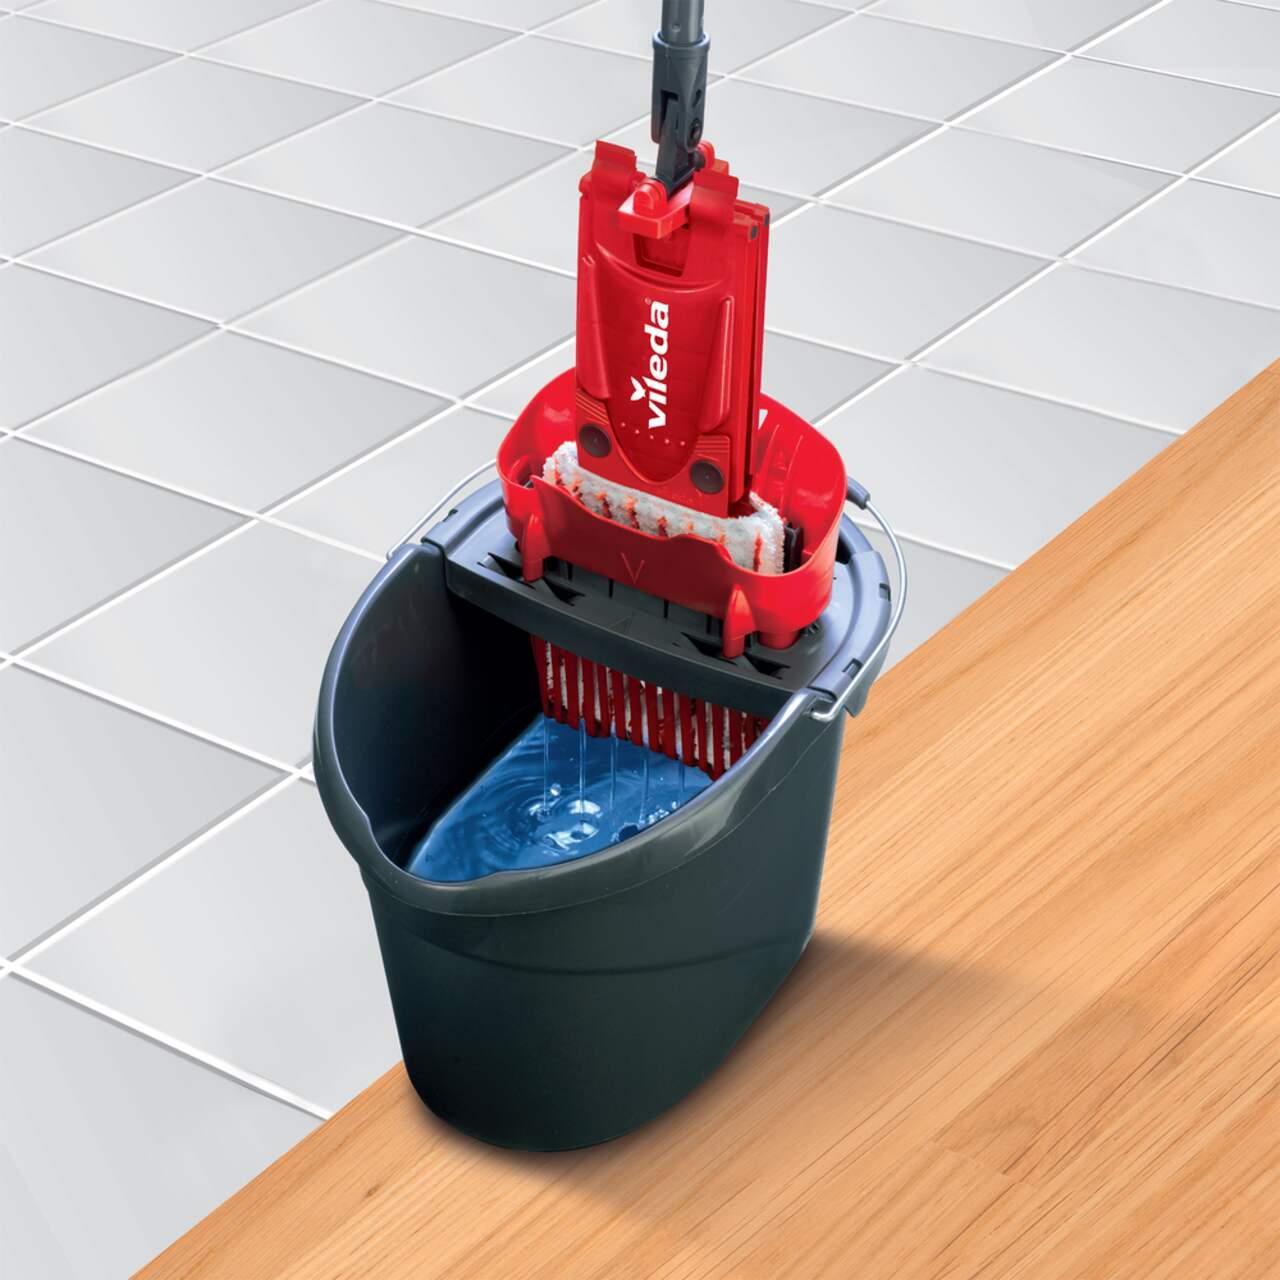 https://media-www.canadiantire.ca/product/living/cleaning/household-cleaning-tools/0429363/refill-for-042-9362-and-042-8481-47a6a85a-7f38-4397-95fa-1480ad16275a.png?imdensity=1&imwidth=1244&impolicy=mZoom